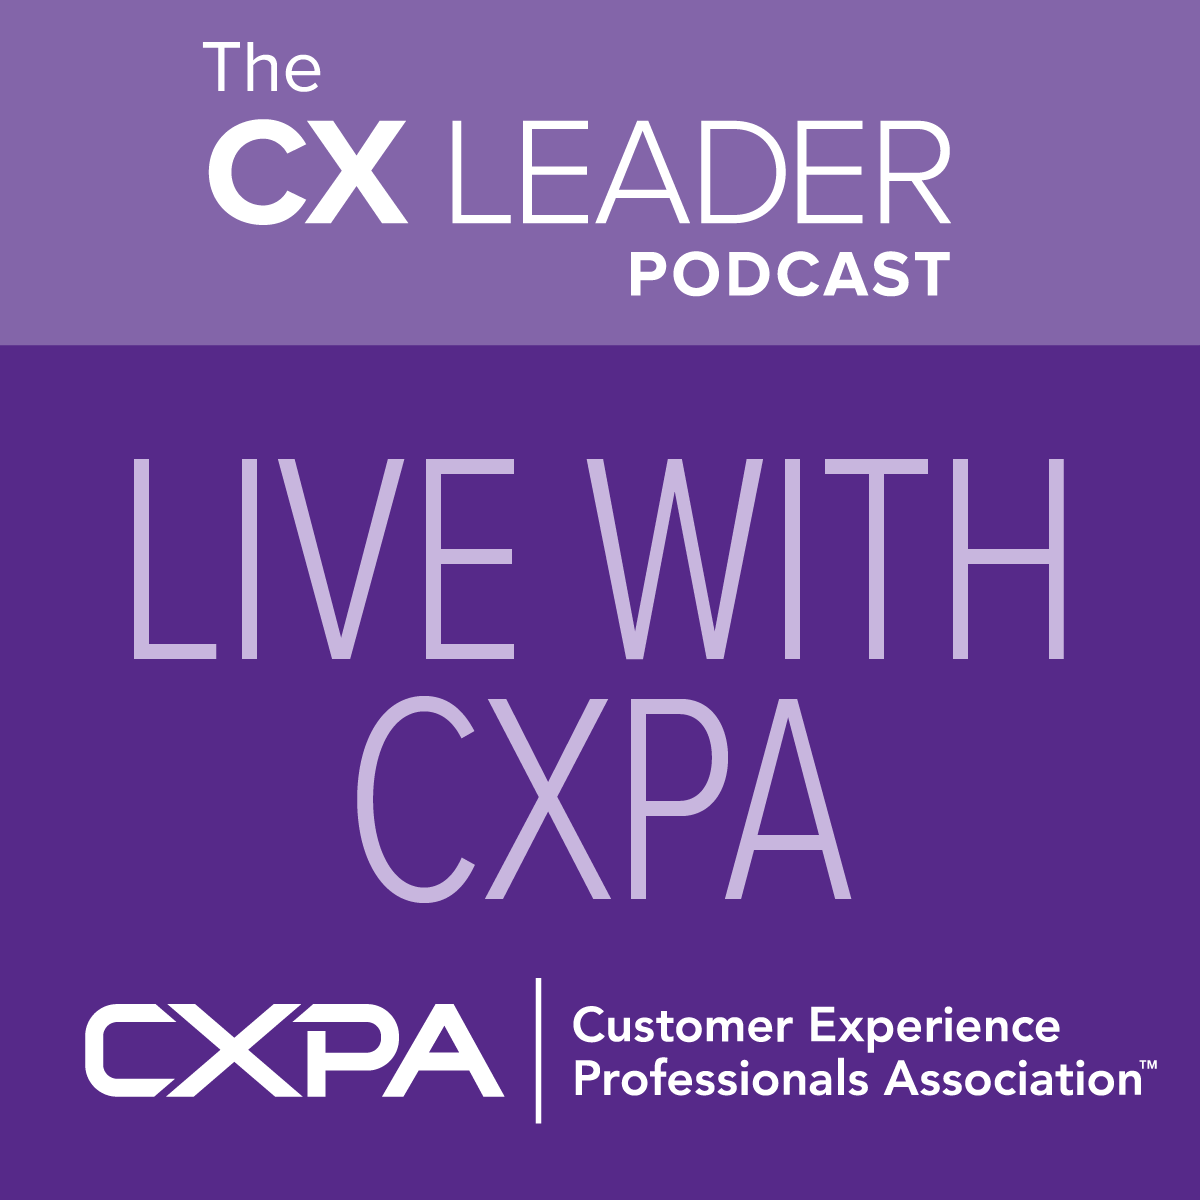 Live with CXPA